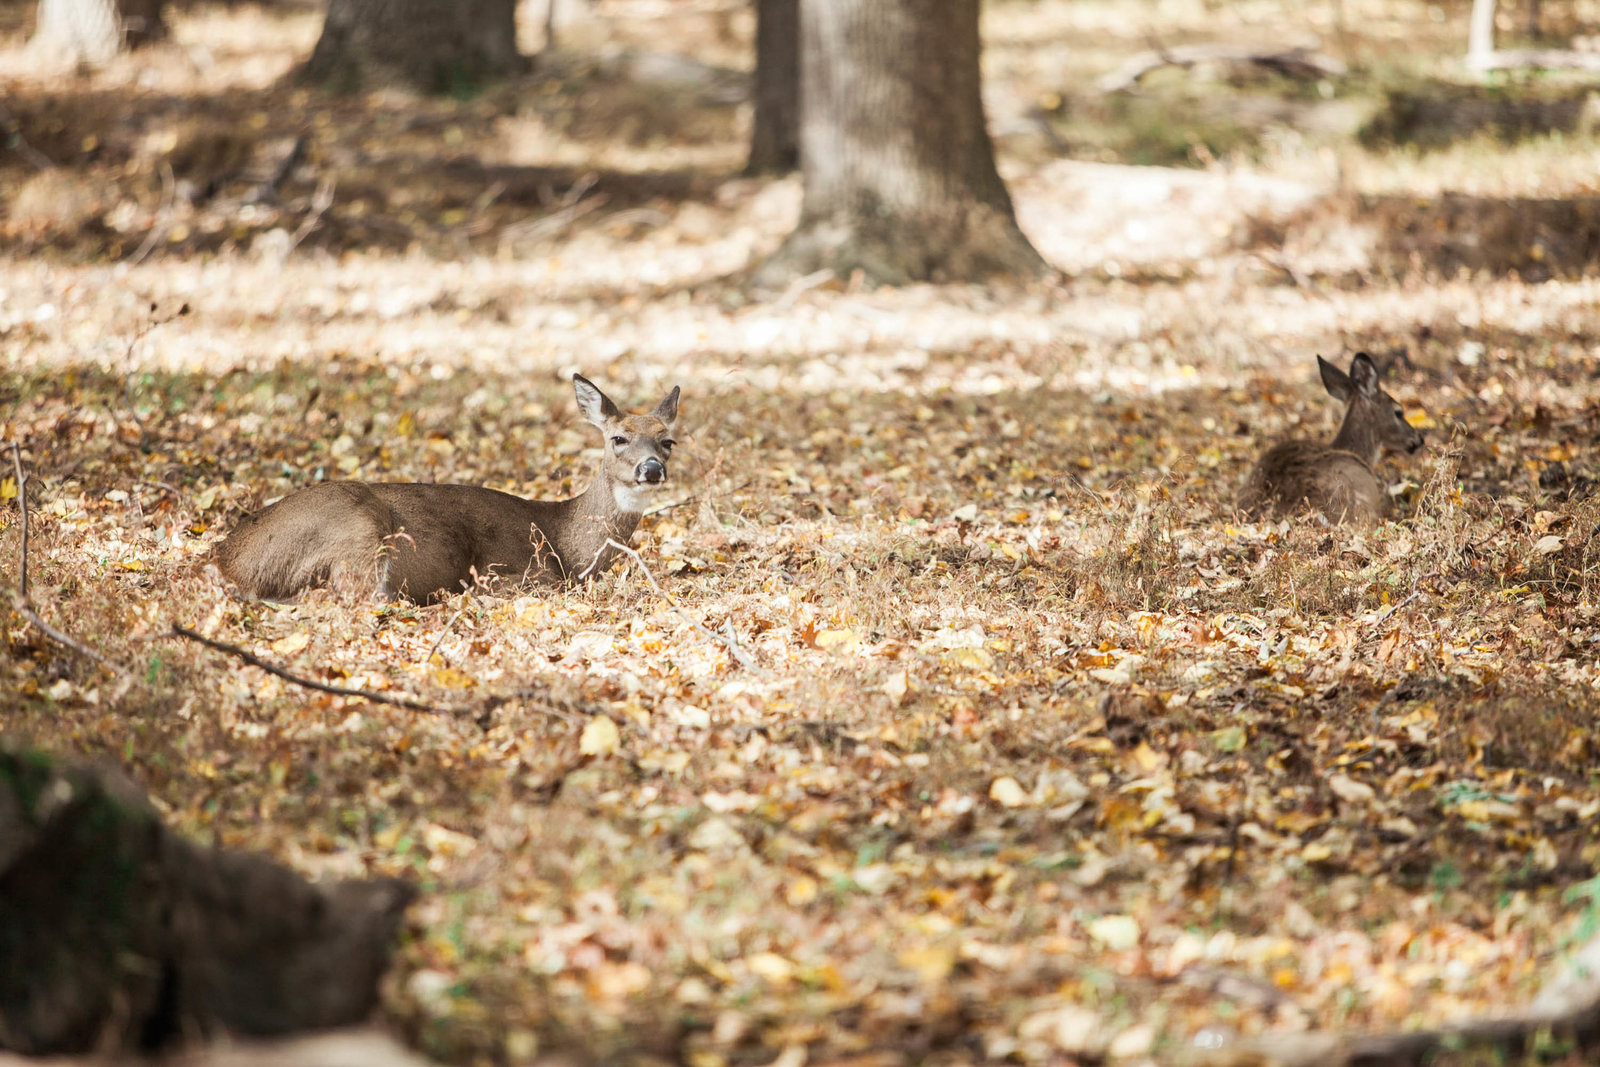 deer-valley-forge-park-pennsylvania-nature-kate-timbers-photography-2390